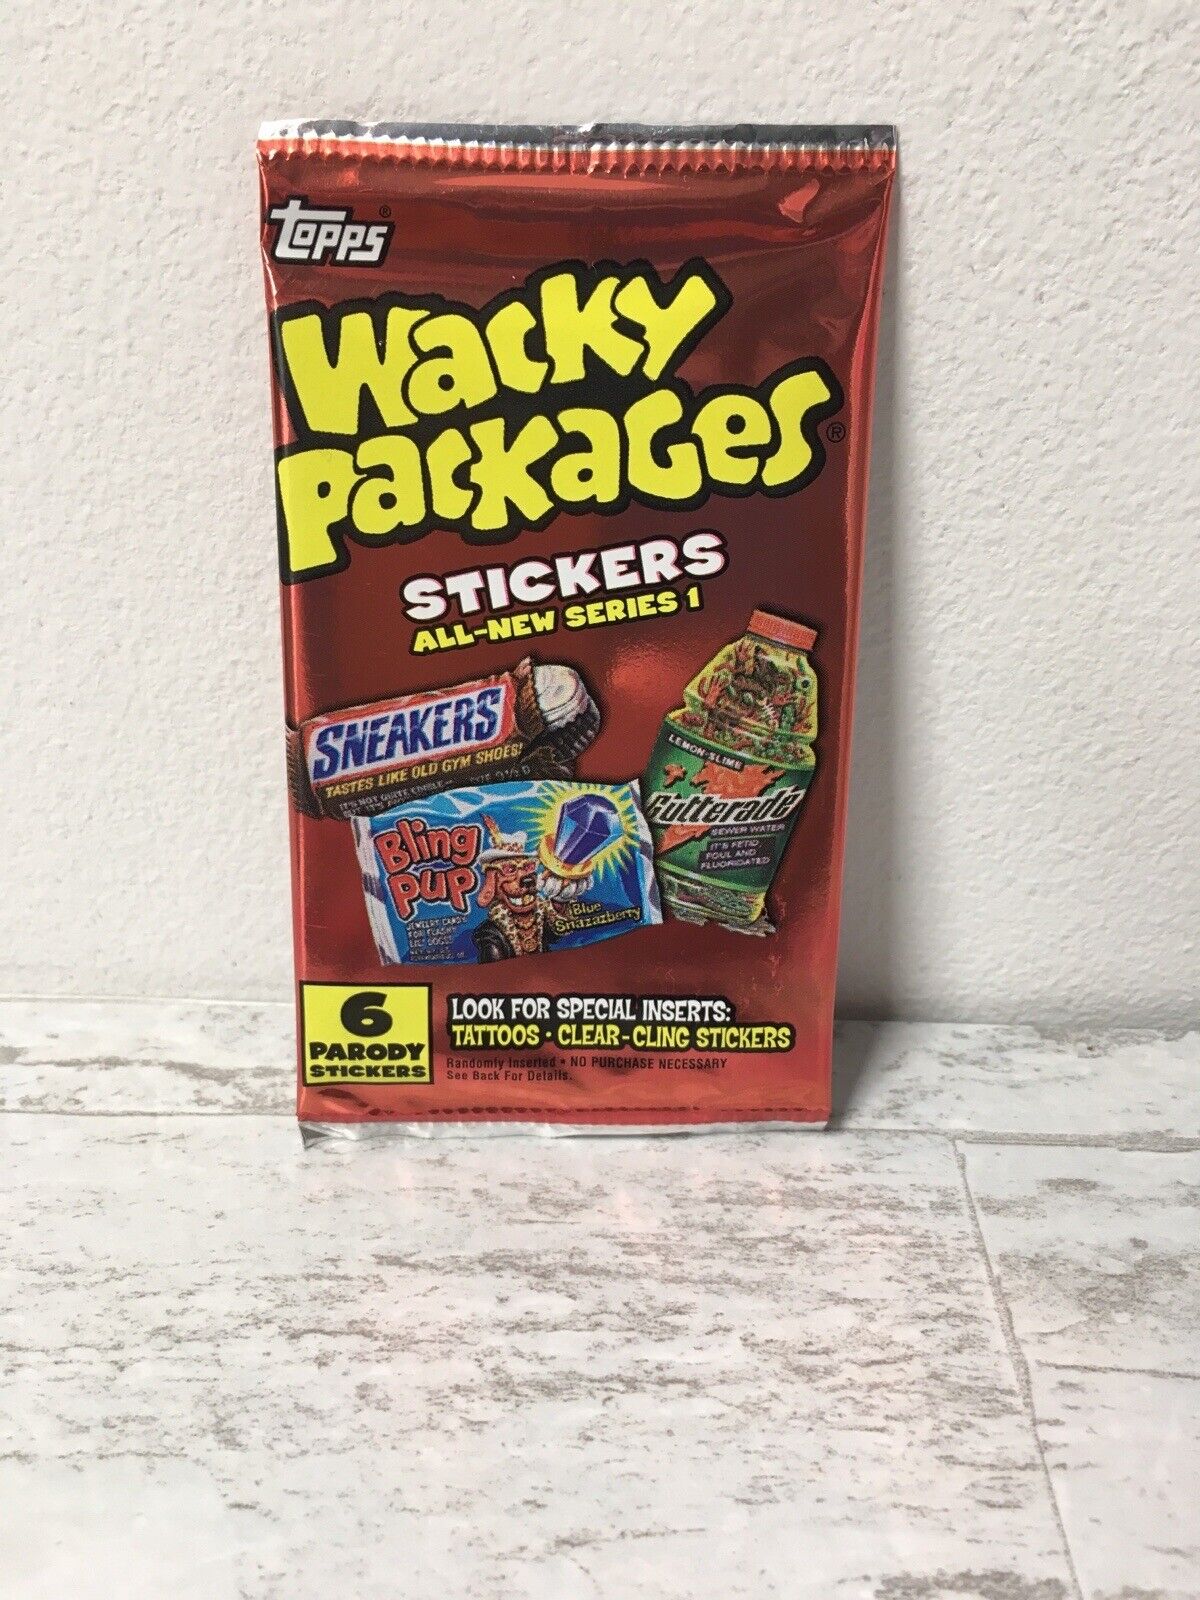 2004 Wacky Packages Topps All-New Series 1 Trading Card Sticker Pack UNOPENED